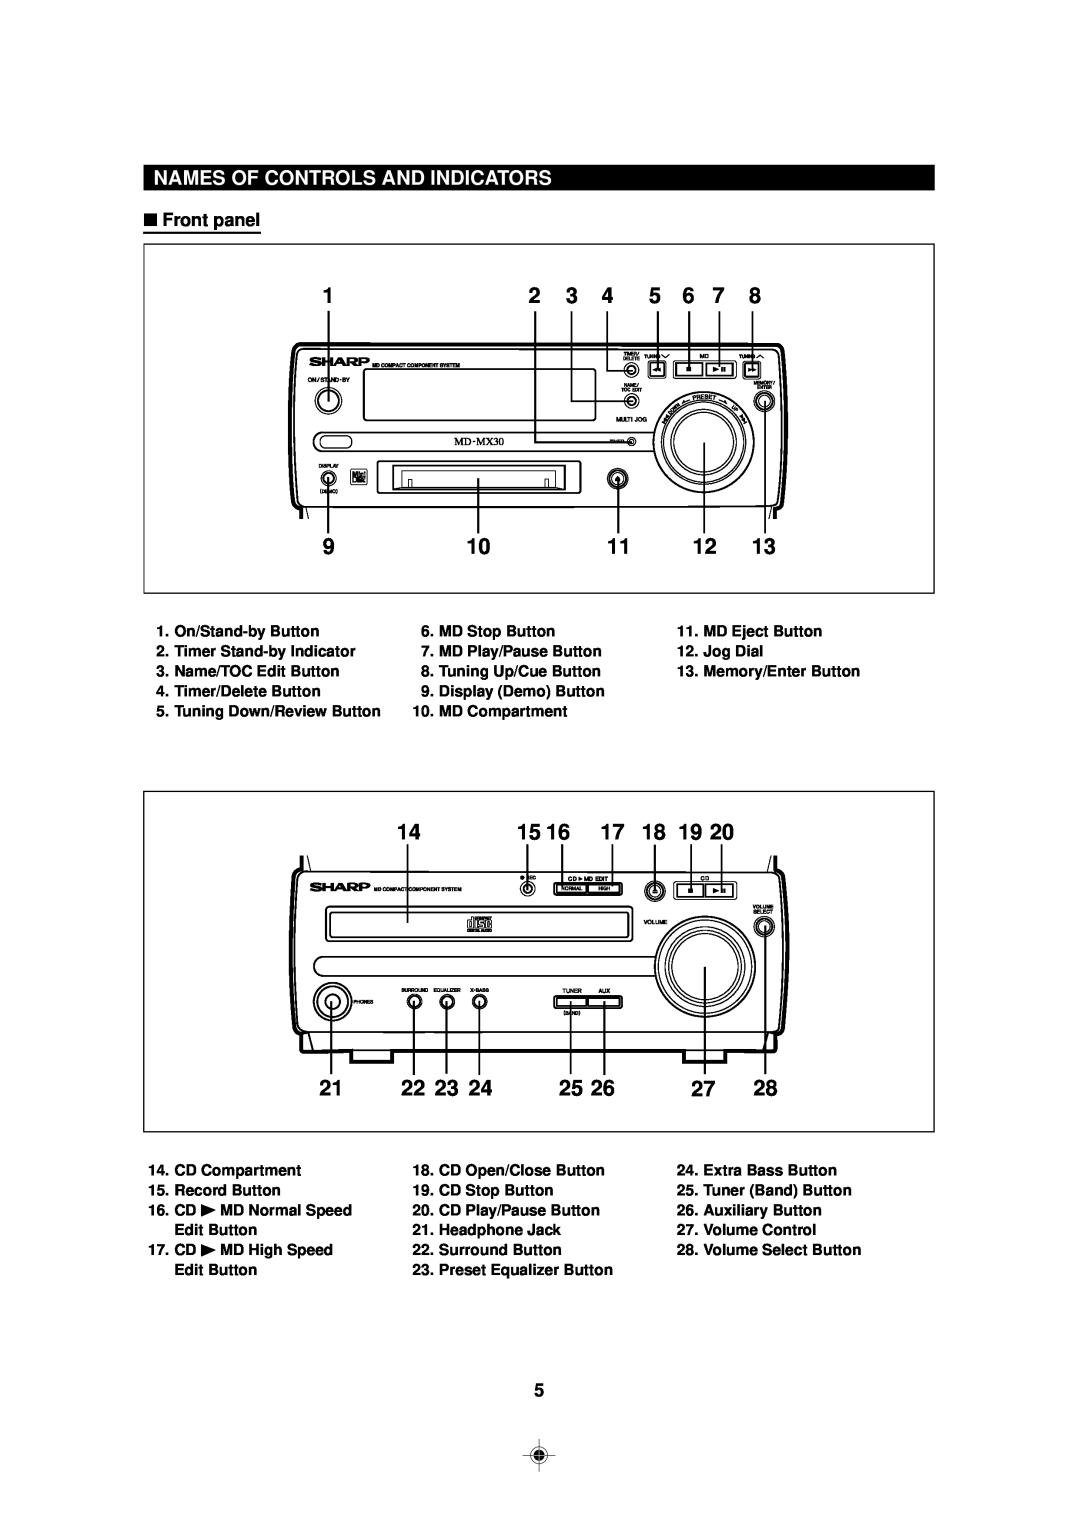 Sharp MD-MX30 operation manual Names Of Controls And Indicators, Front panel 